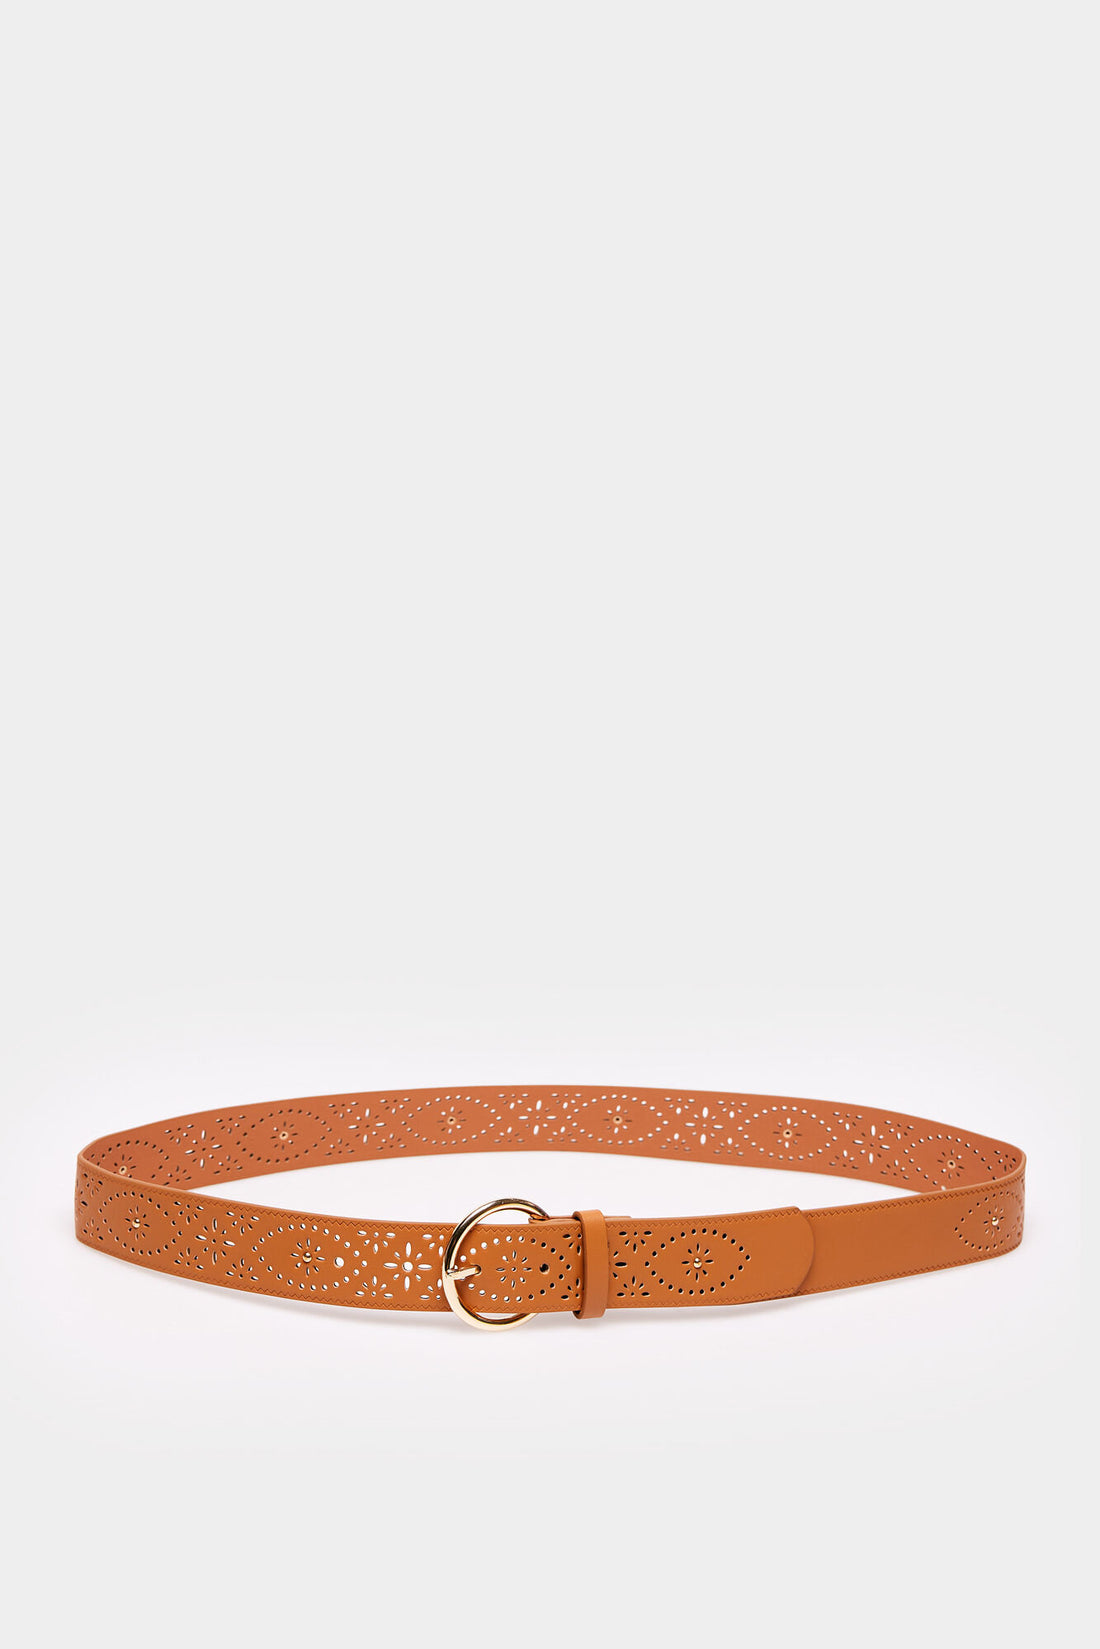 Thin Brown Belt With Cutout Design_8467052_65_01